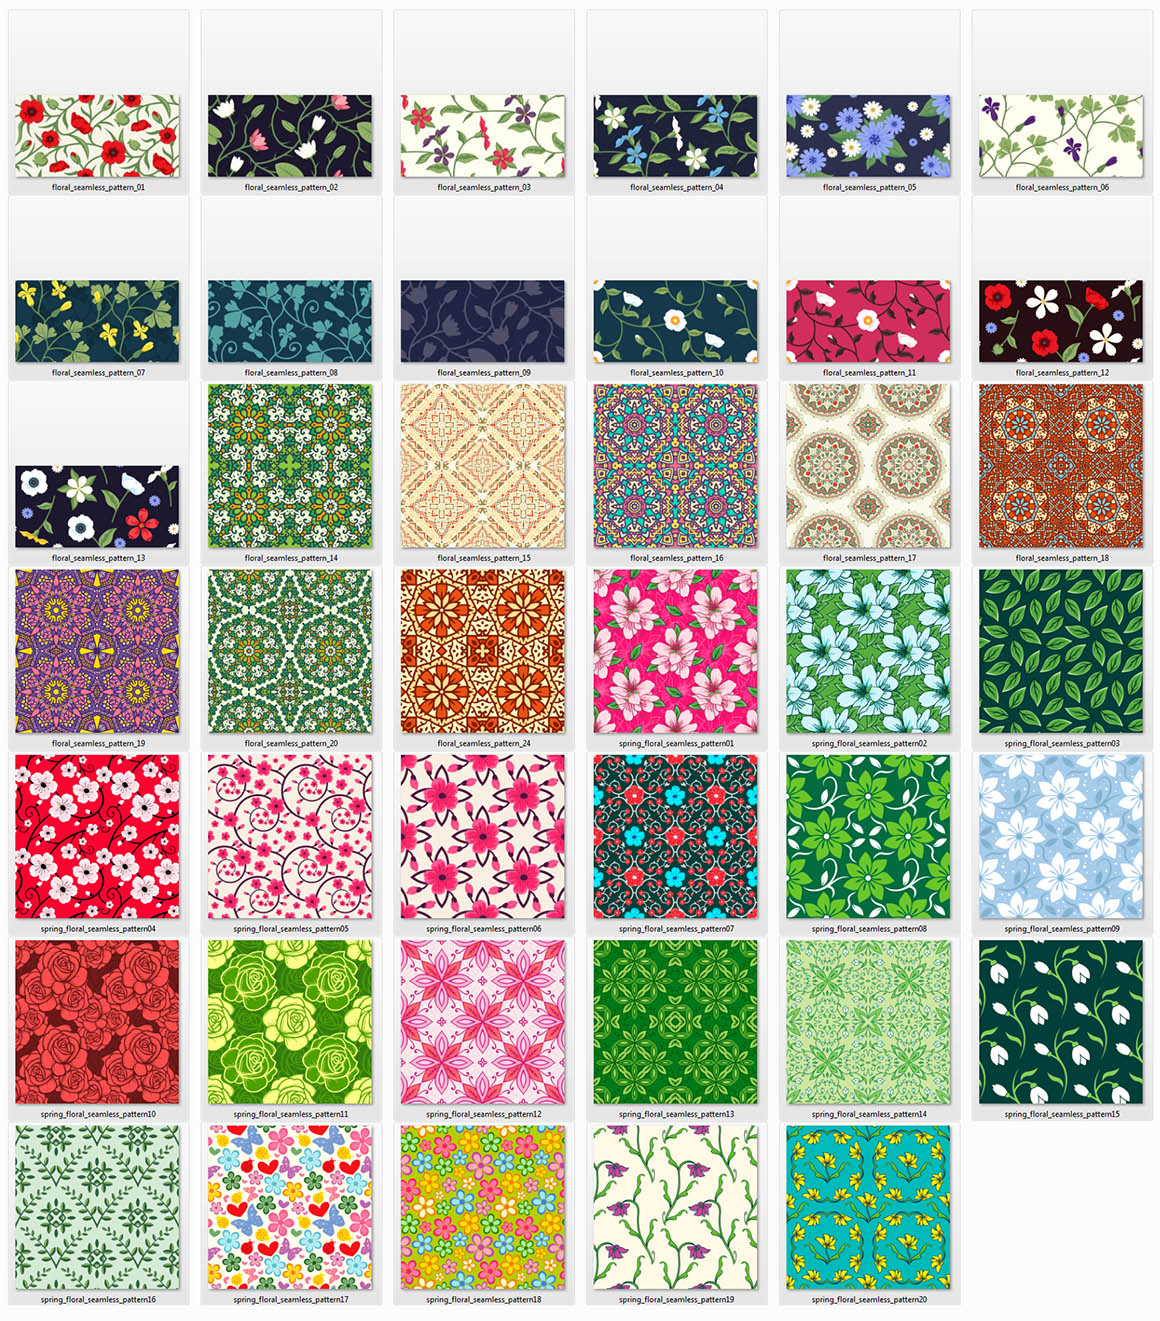 Take a look at some patterns included in this bundle: